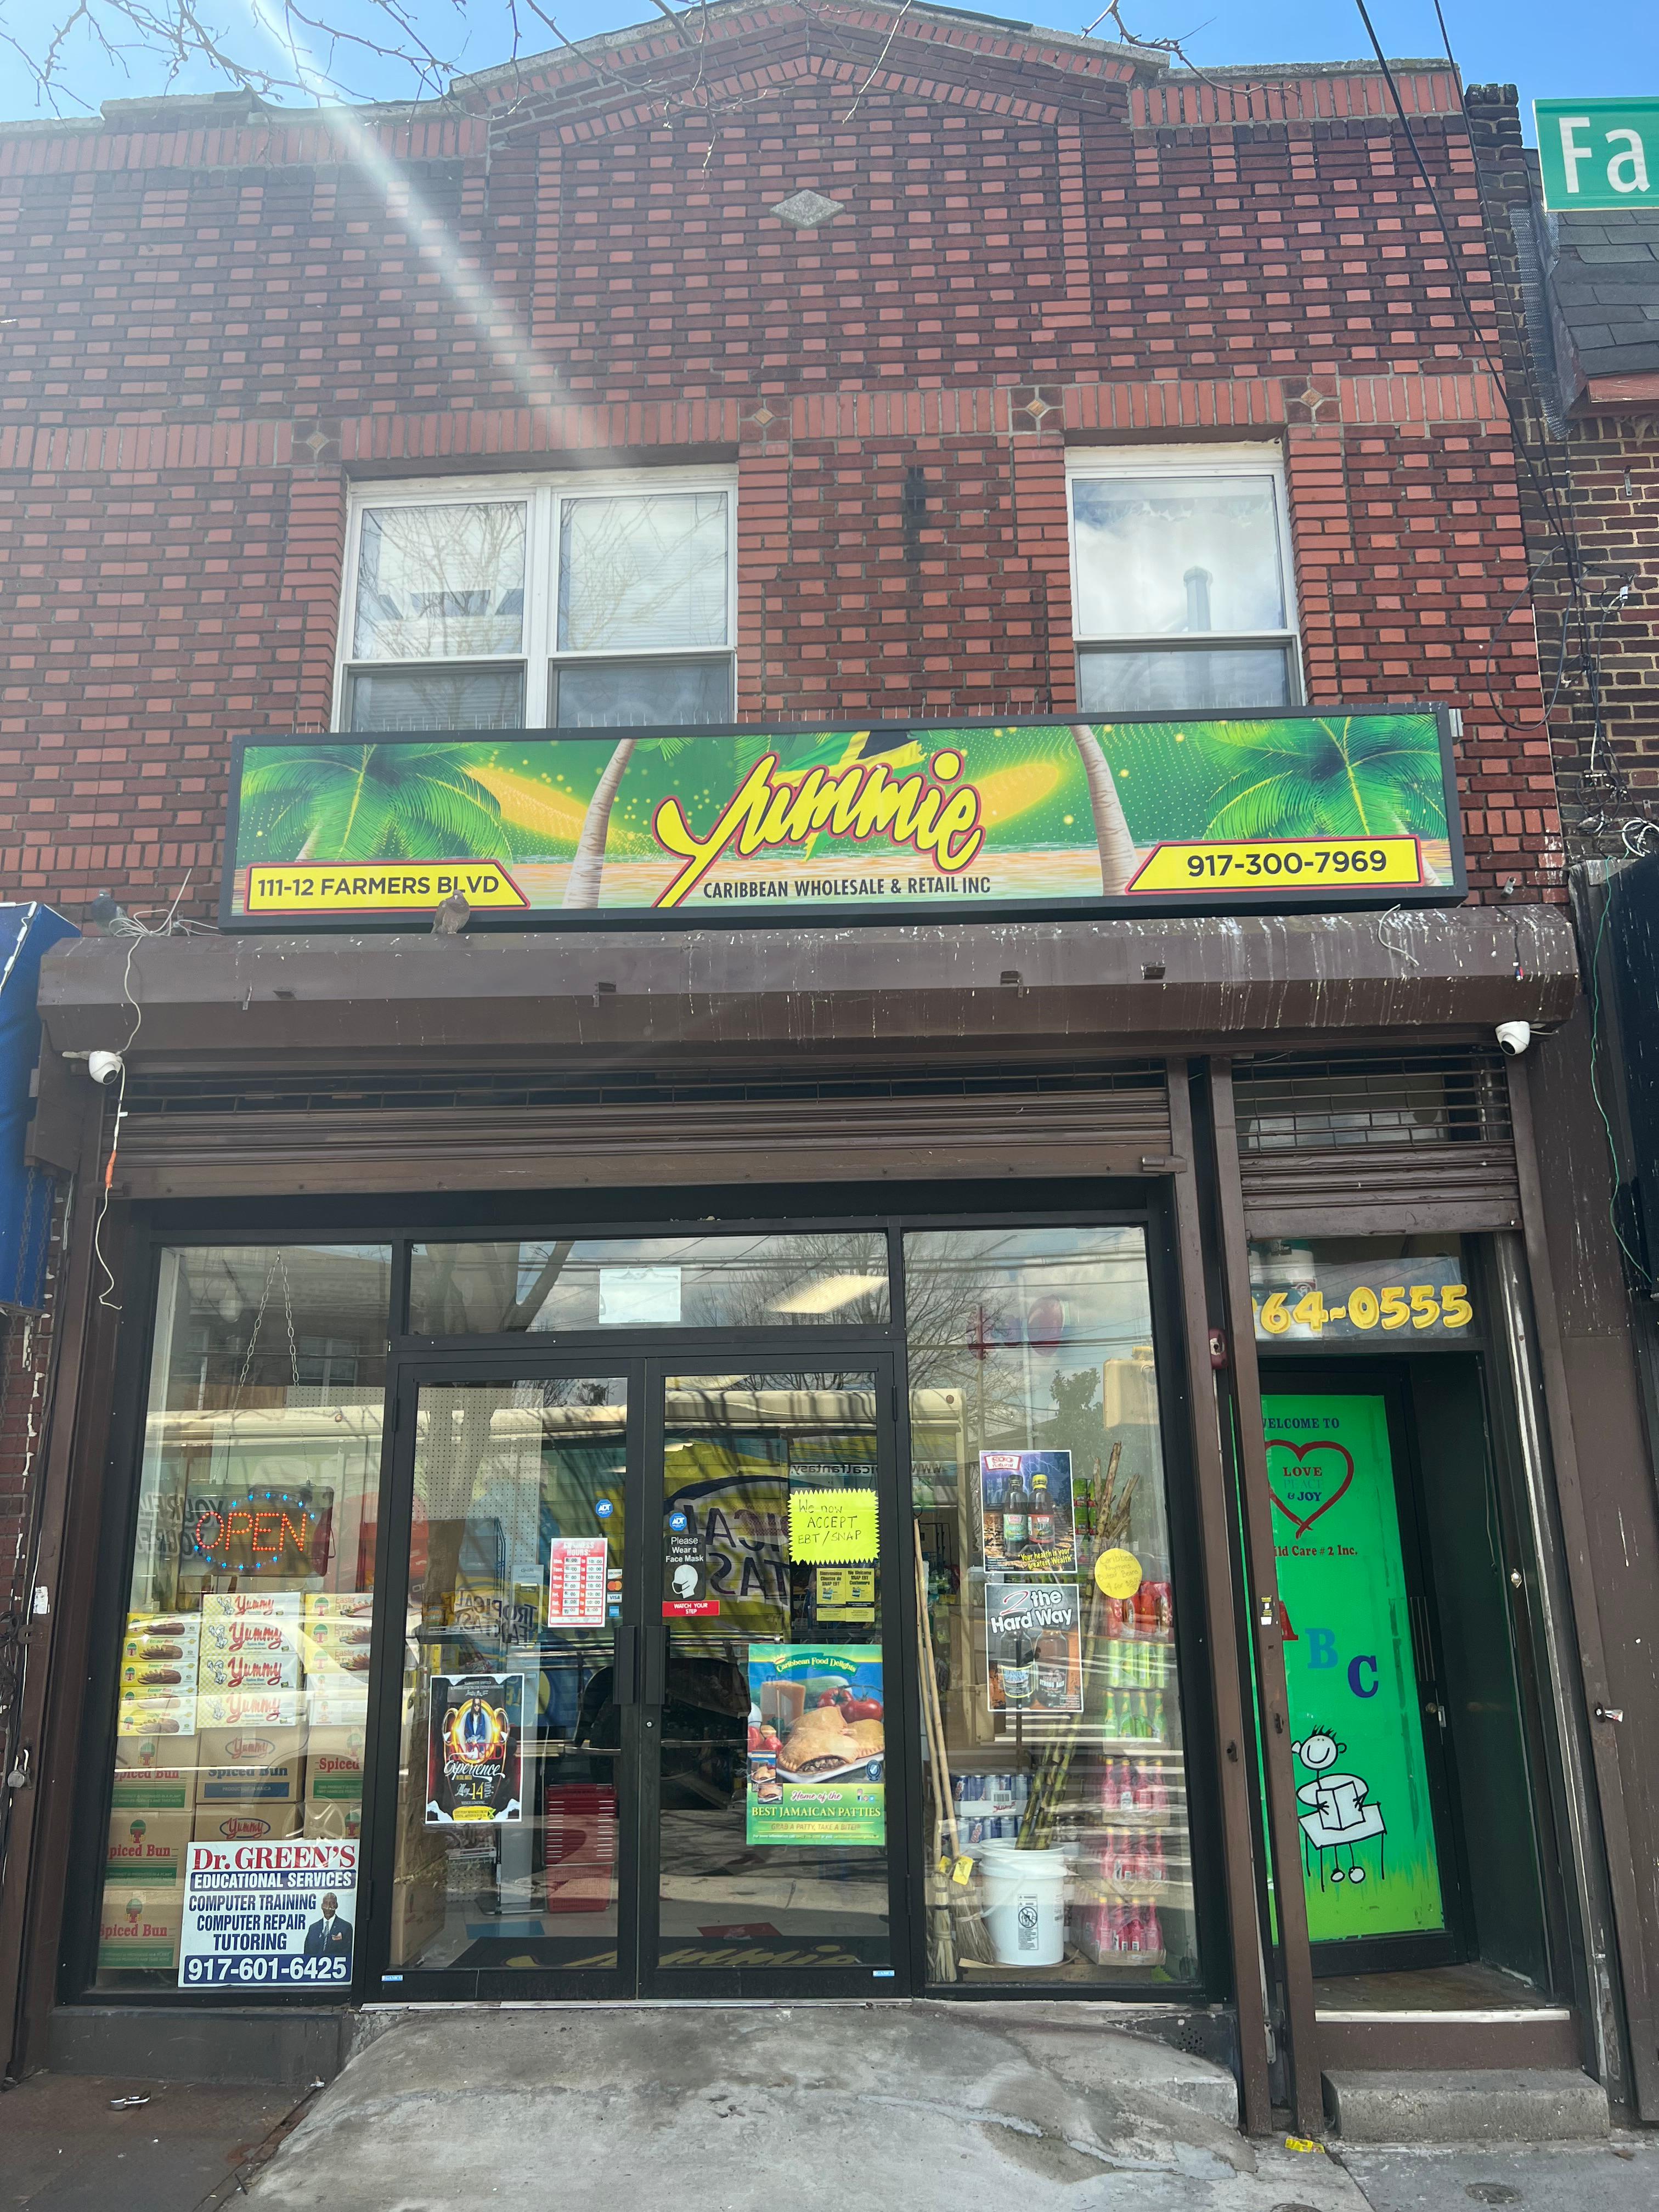 Yummie Caribbean Wholesale & Retail Inc. - Queens, NY 11412 - (917)300-7969 | ShowMeLocal.com